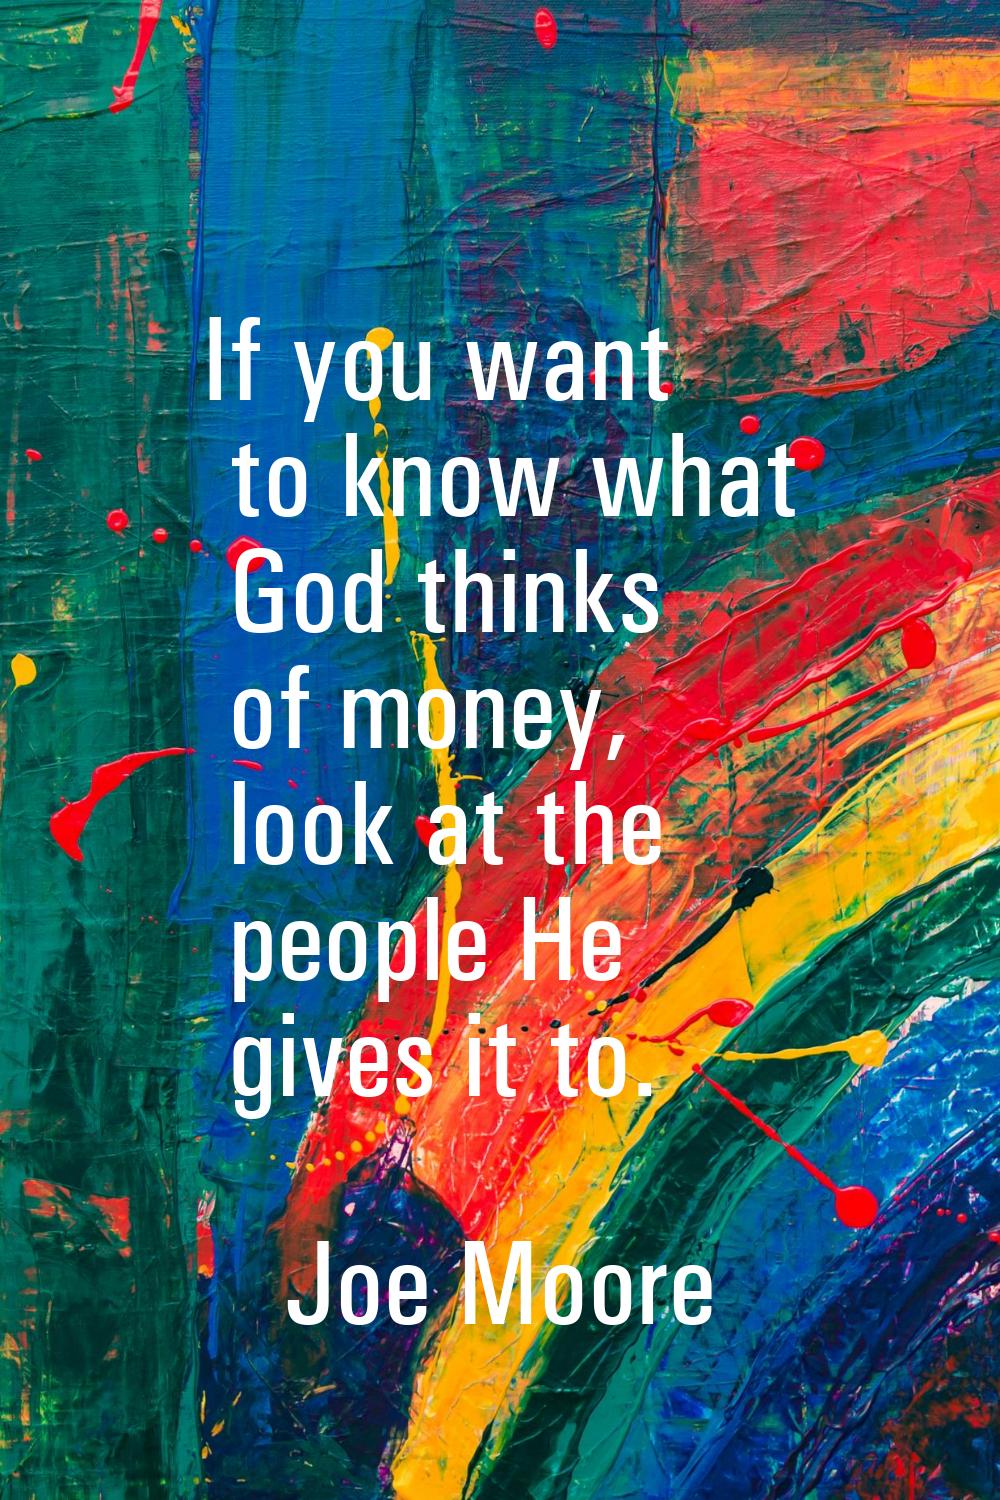 If you want to know what God thinks of money, look at the people He gives it to.